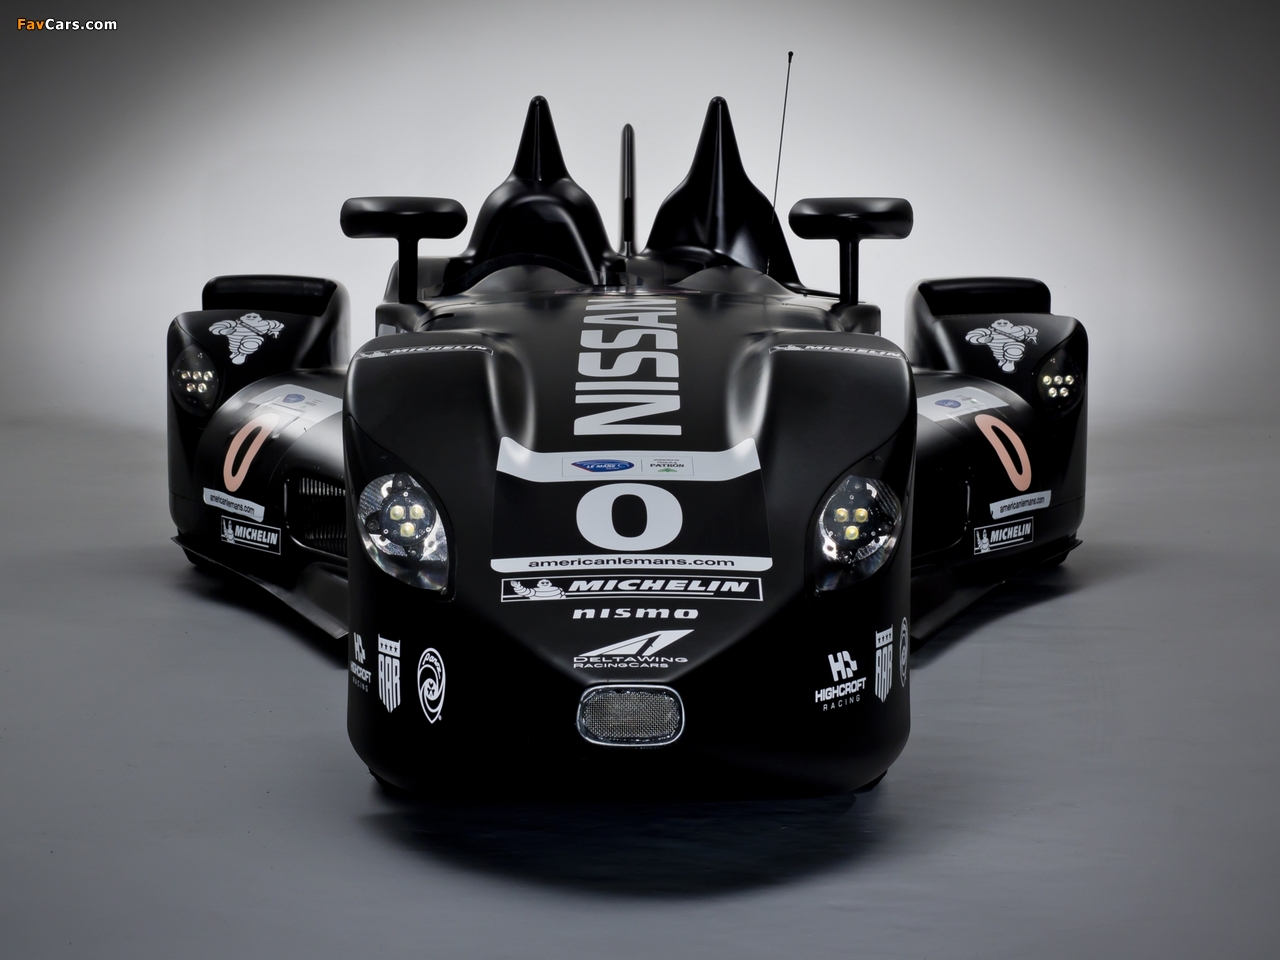 Nissan DeltaWing Experimental Race Car 2012 pictures (1280 x 960)